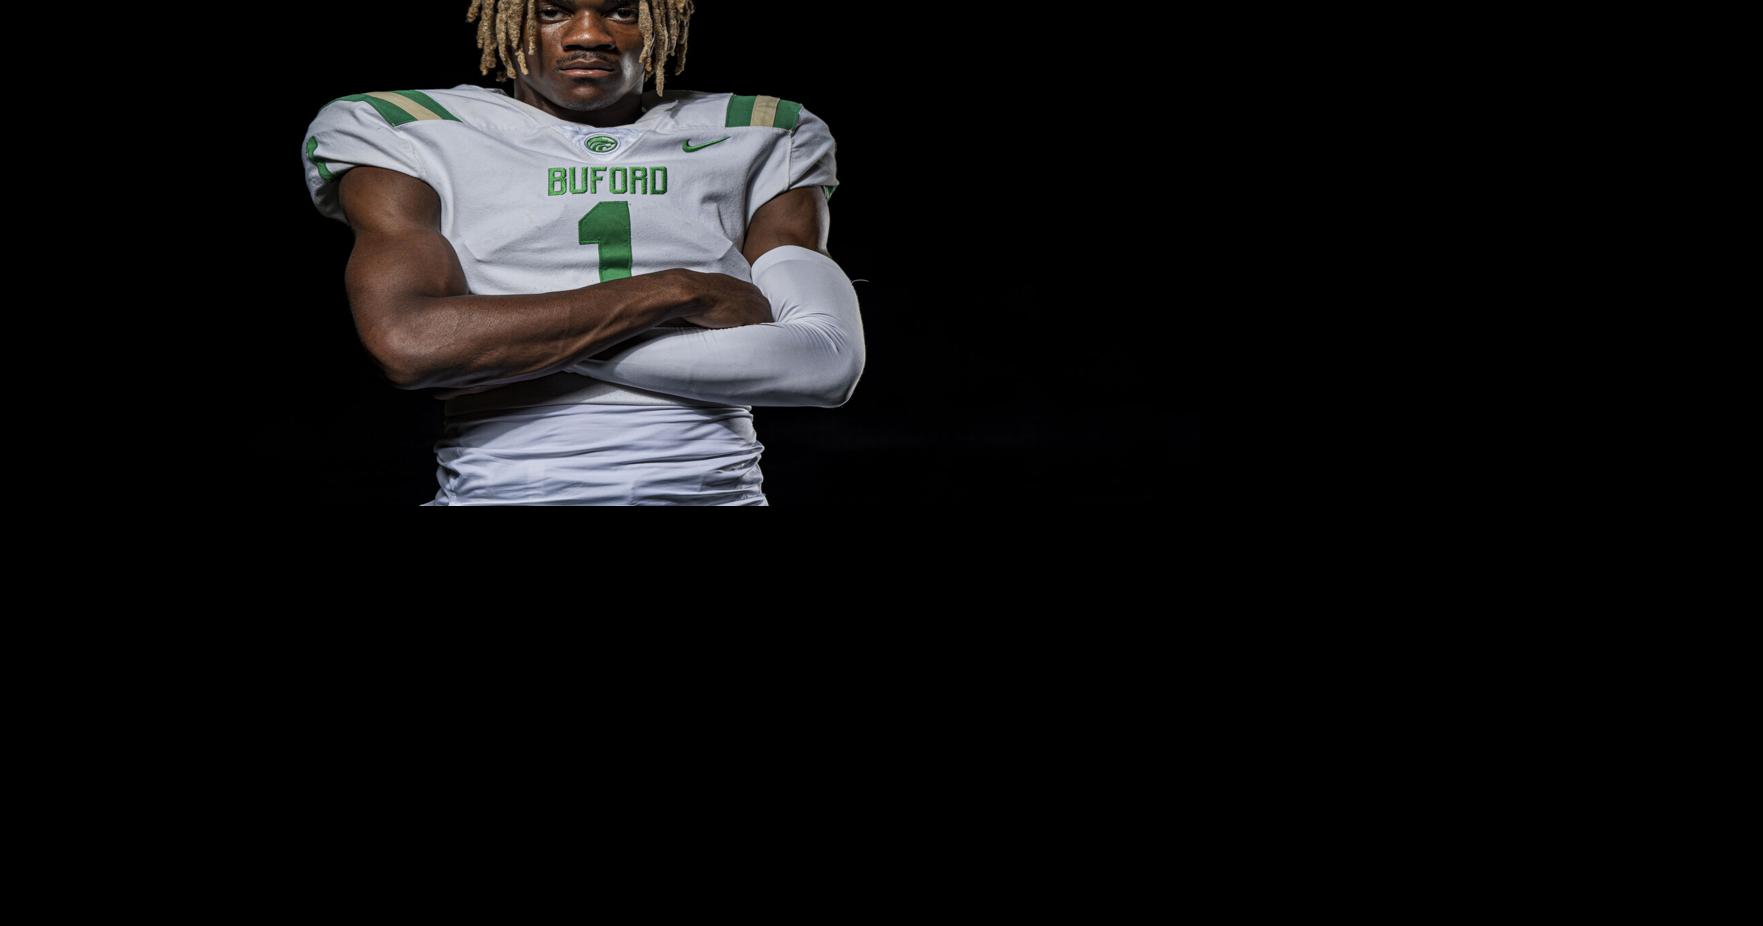 Florida State earns commitment from five-star Buford athlete K.J. Bolden | Sports